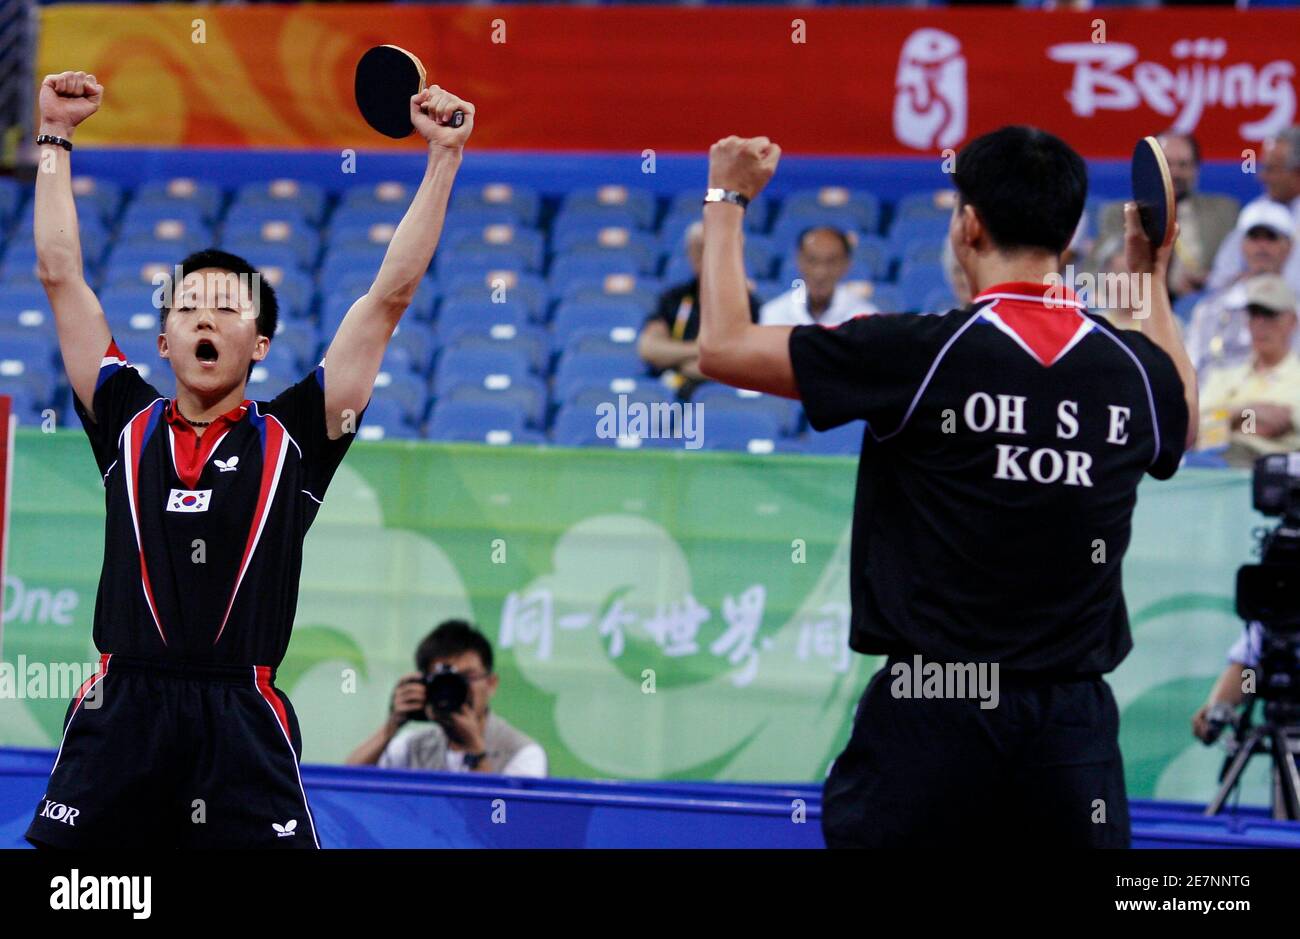 Yoon Jae-Young and Oh Sang-Eun (R) of South Korea celebrate winning their men's team bronze medal table tennis doubles match against Austria at the Beijing 2008 Olympic Games August 18, 2008.     REUTERS/Beawiharta (CHINA) Stock Photo